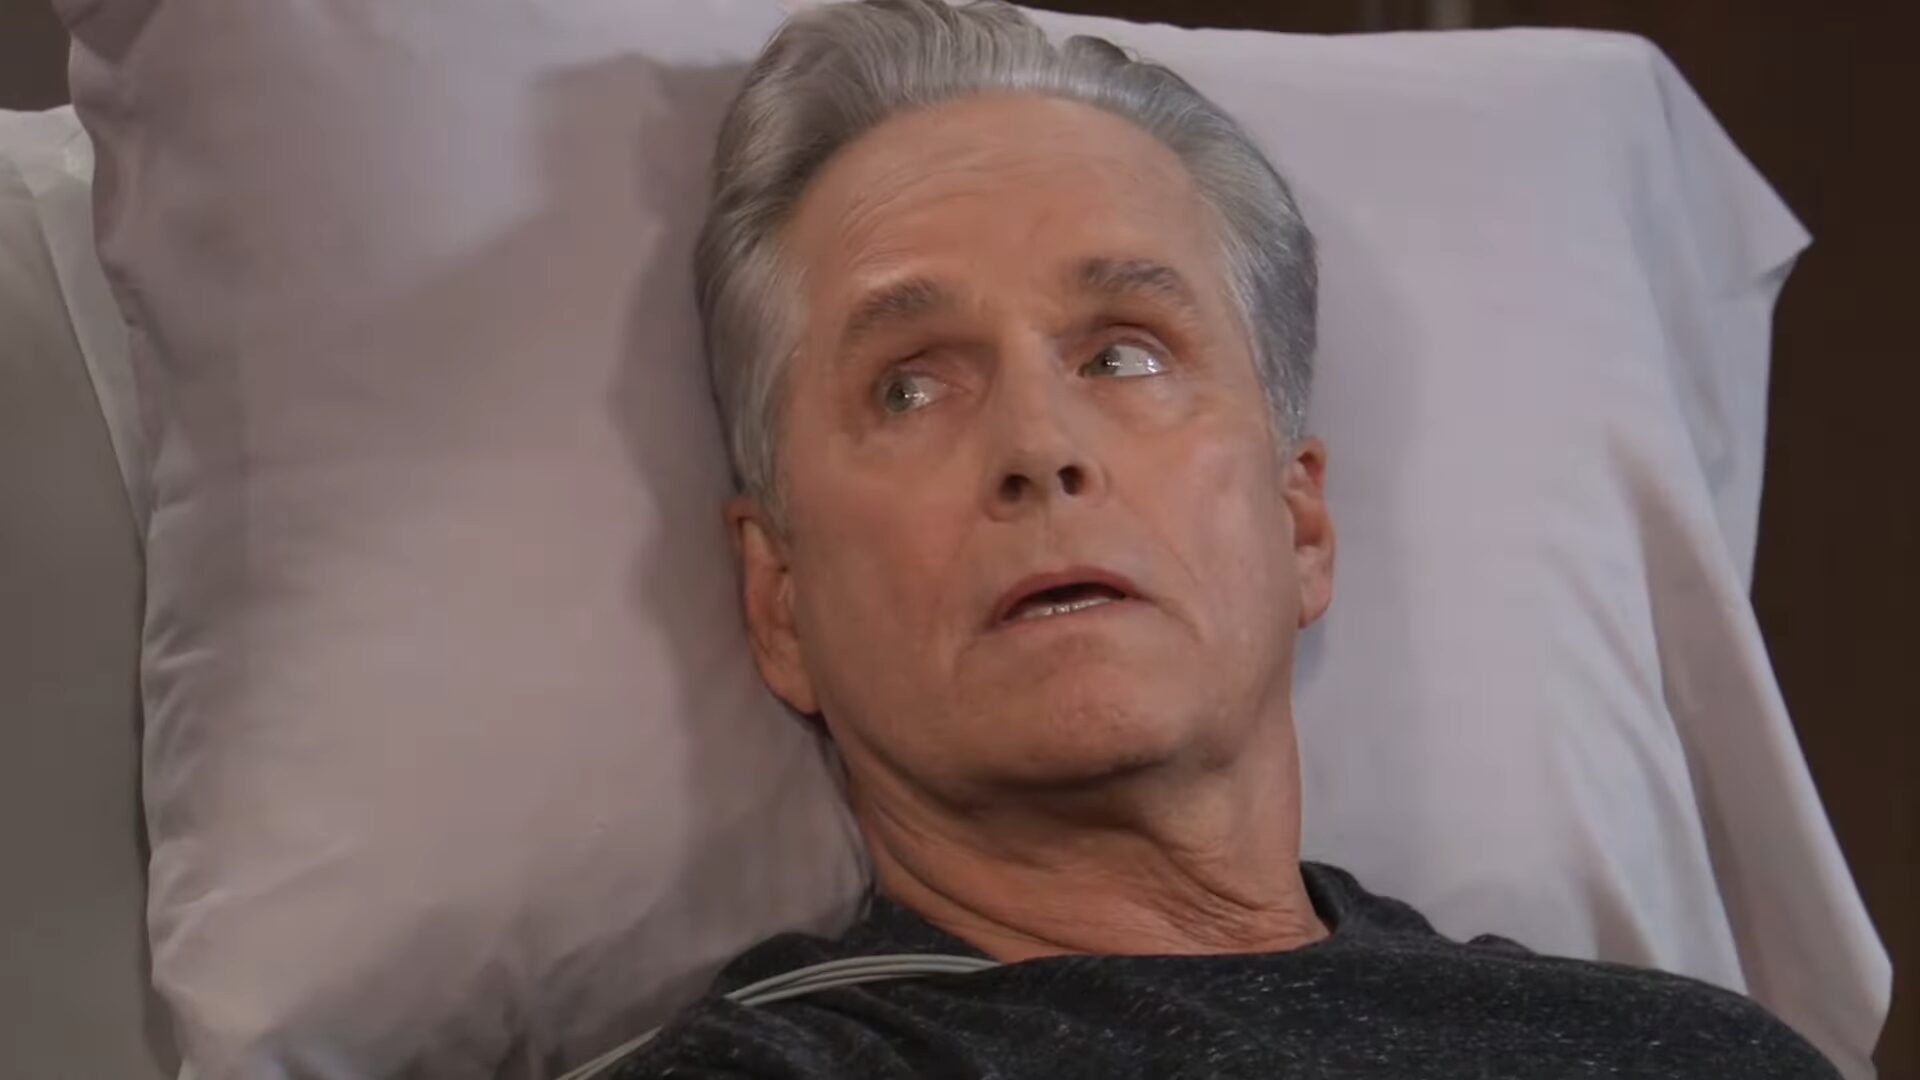 gregory in hospital bed